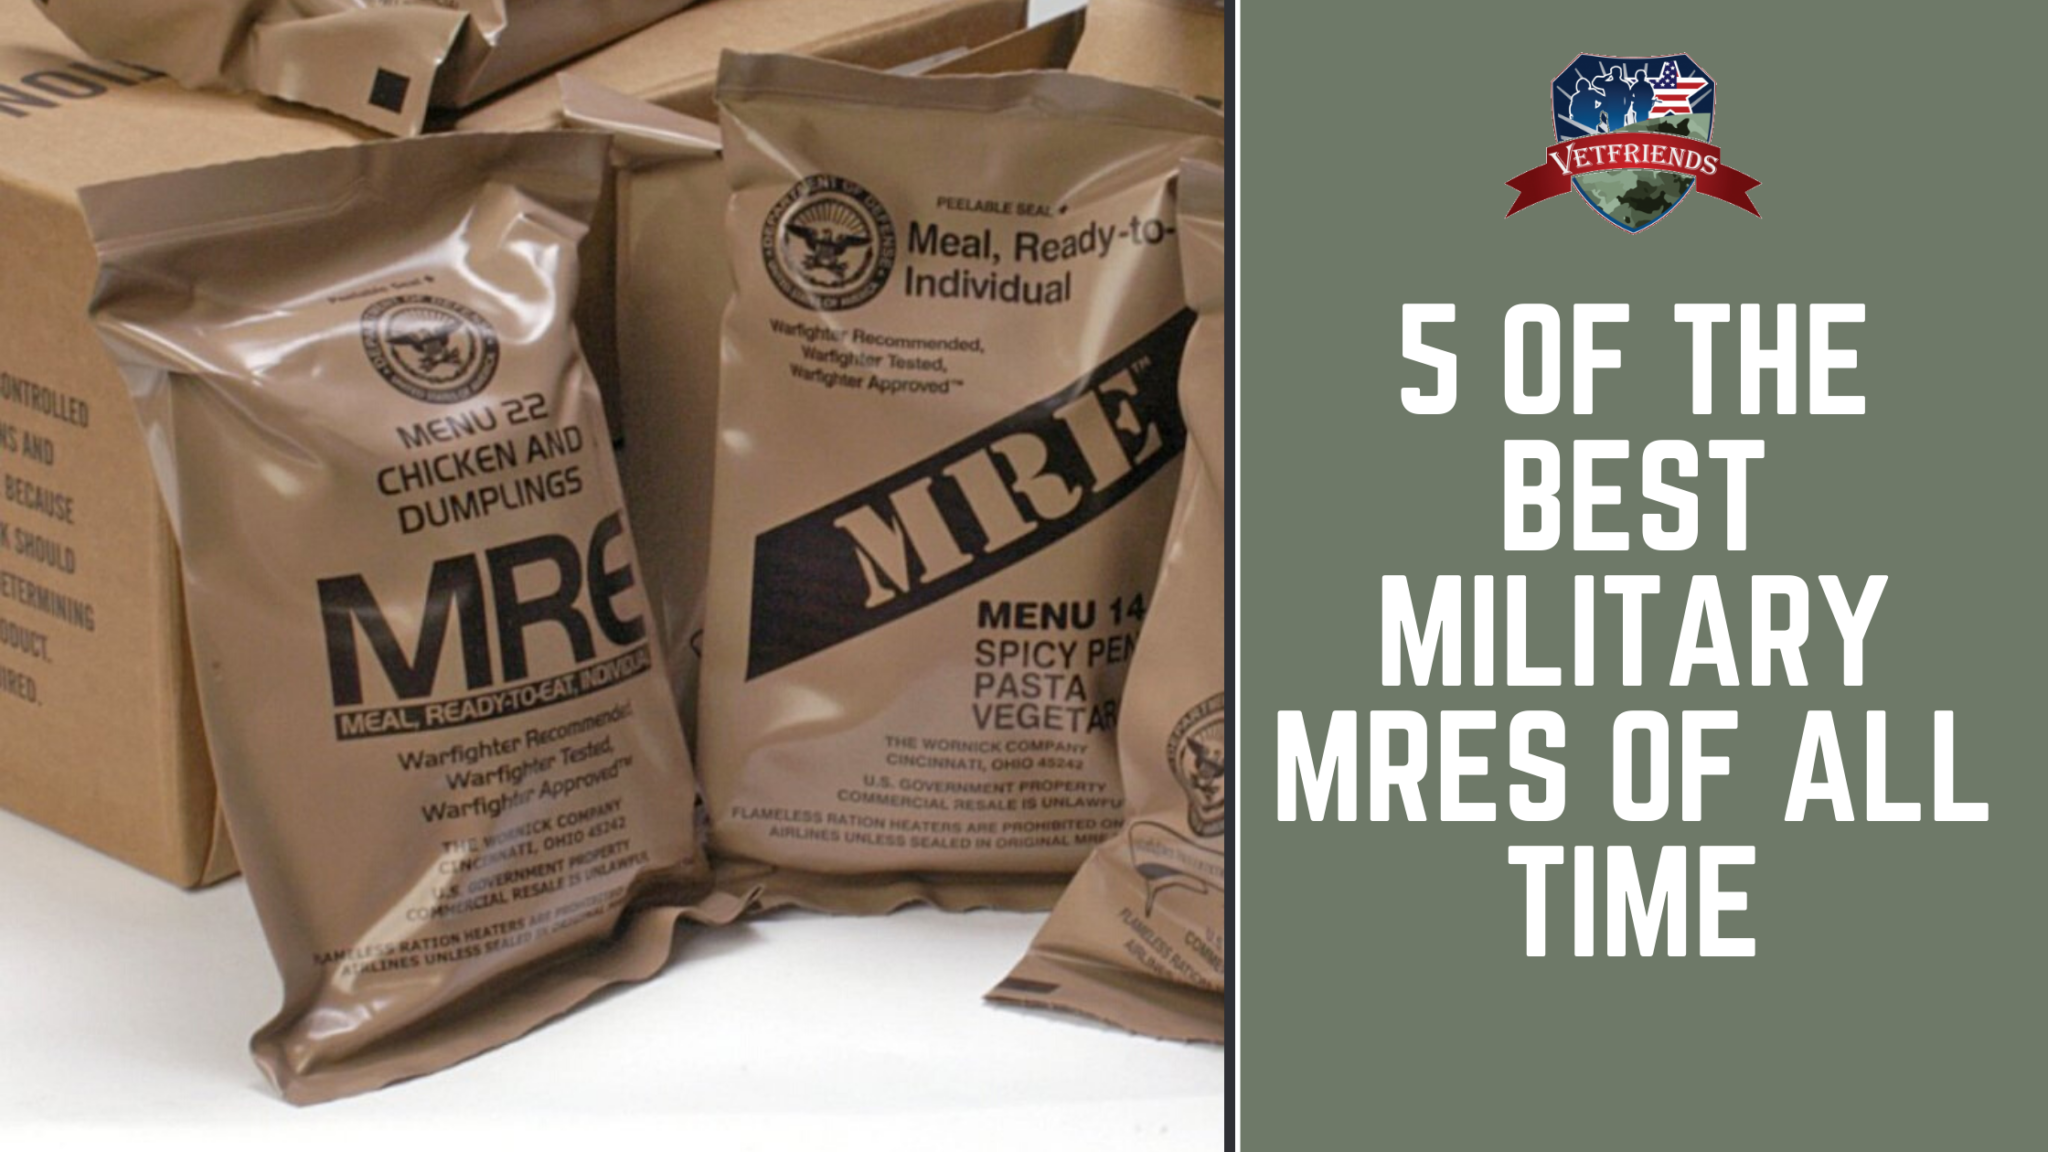 best mre meals - organic mre meals - 5 of the Best Military MREs of All Time - VetFriends